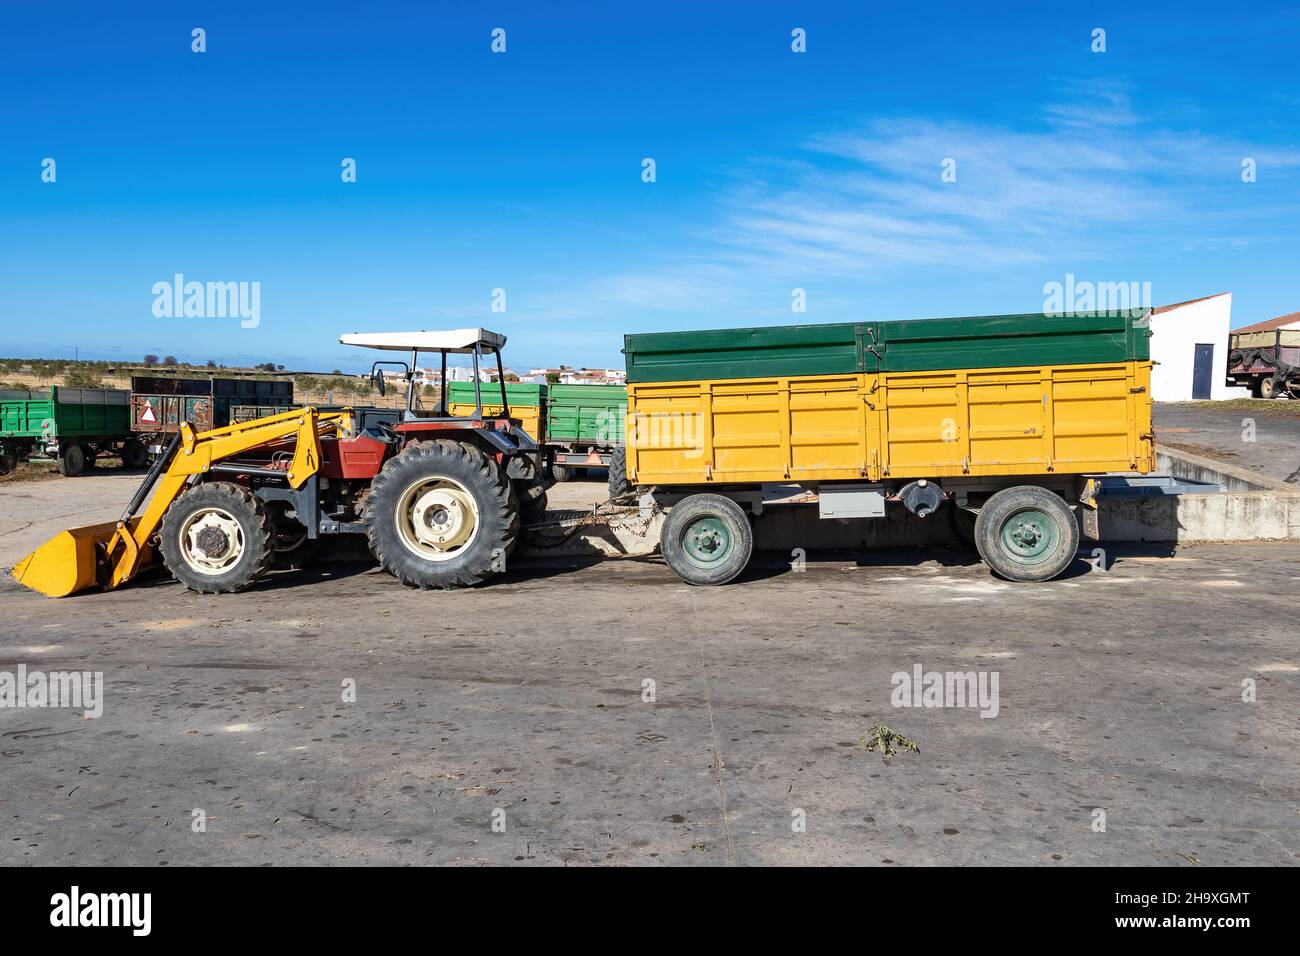 Tractor with trailer to transport the olive harvest to the olive oil factory Stock Photo